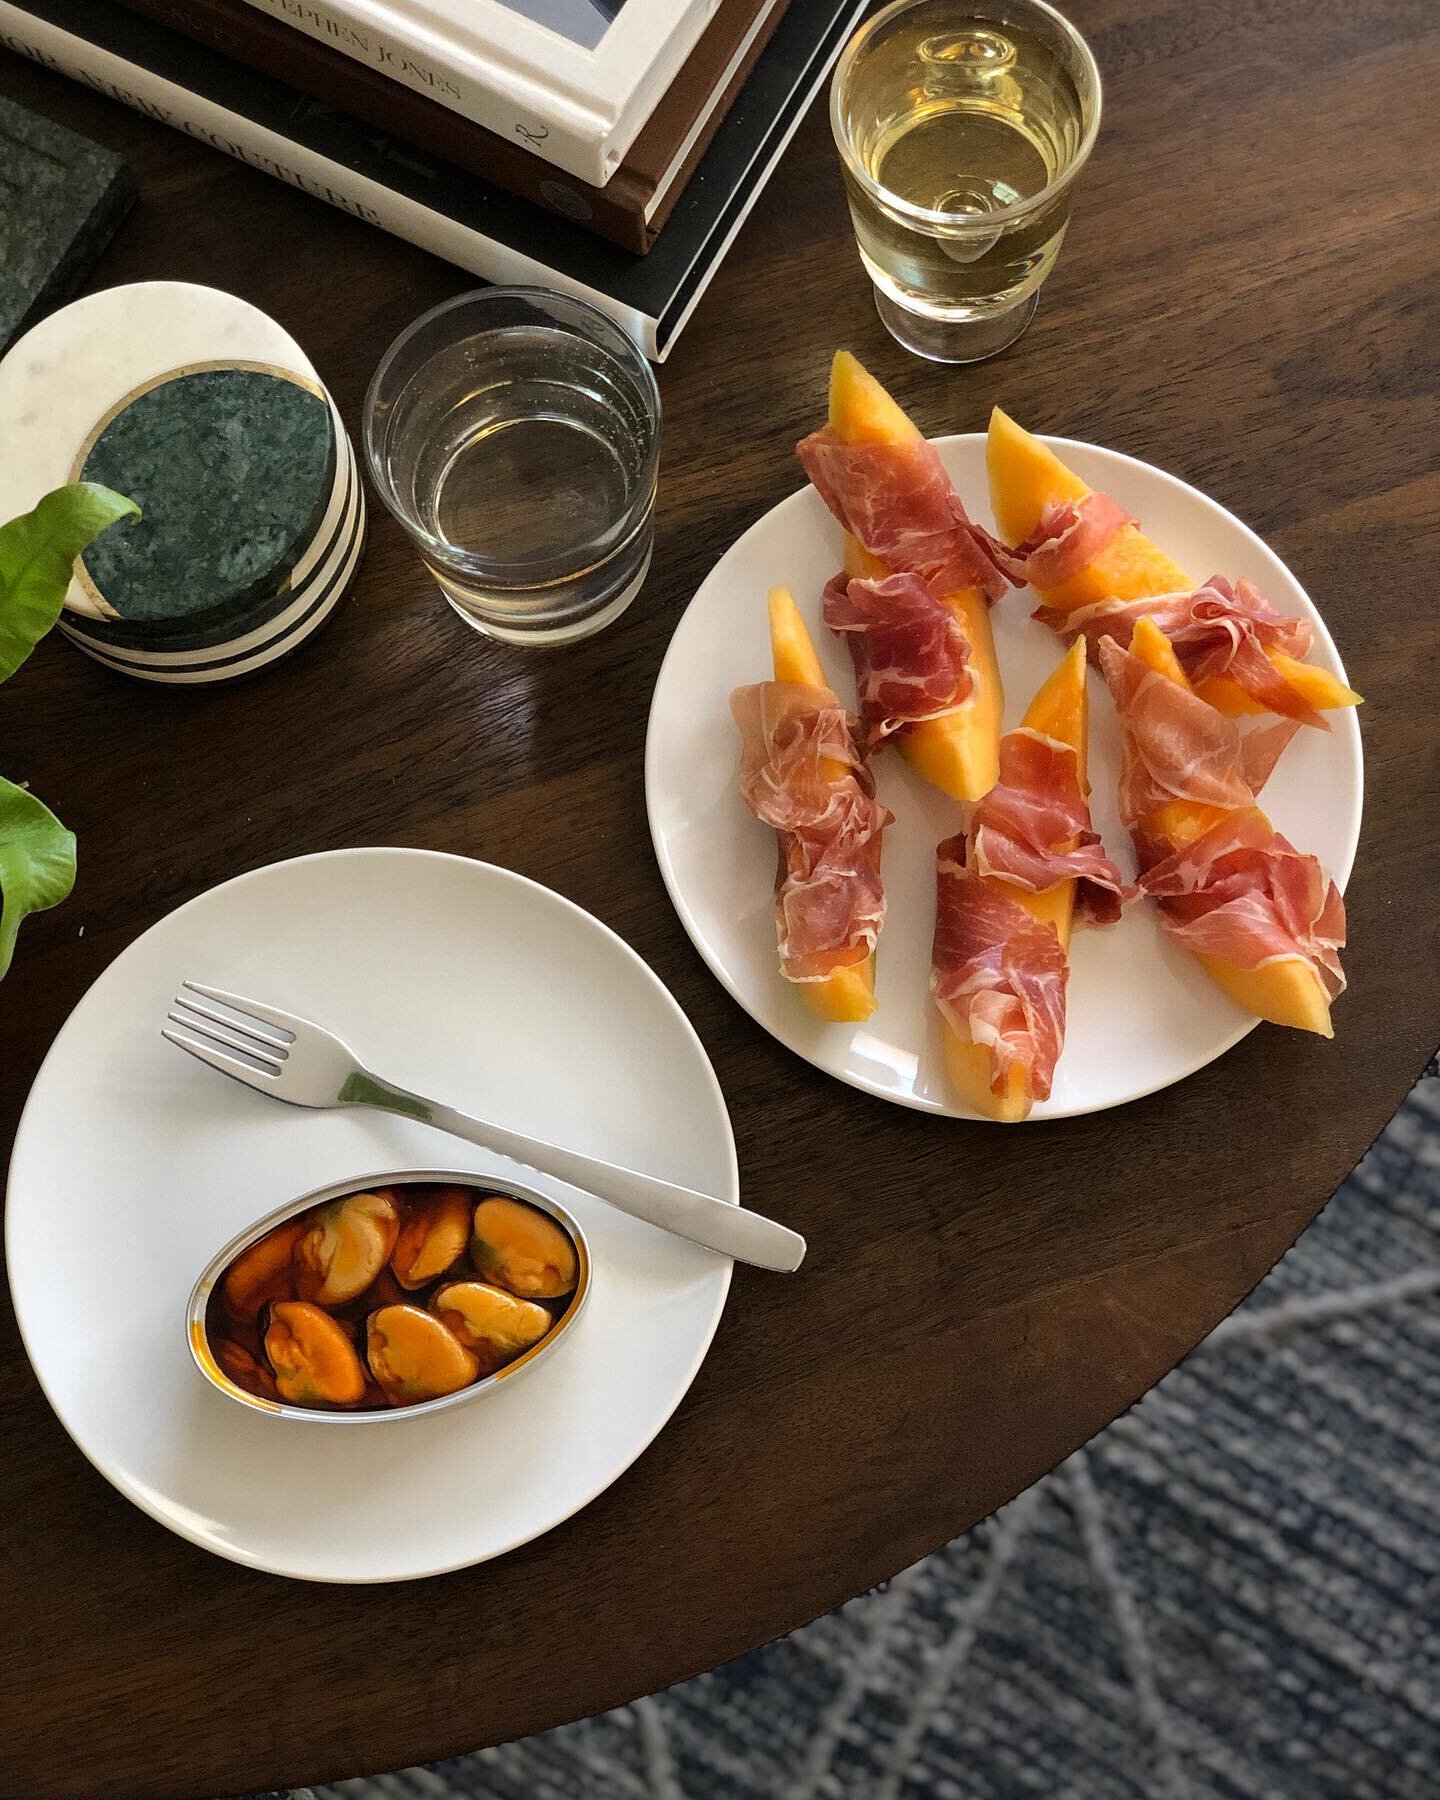 I love sharing food with y&rsquo;all! Recent at-home summer lunch vibes:
1️⃣When summer was too hot to handle🔥: Prosciutto-wrapped cantaloupe &amp; Spanish canned mussels w/ a glass of chilled white wine
2️⃣When it&rsquo;s more cool outside😎: Cauli